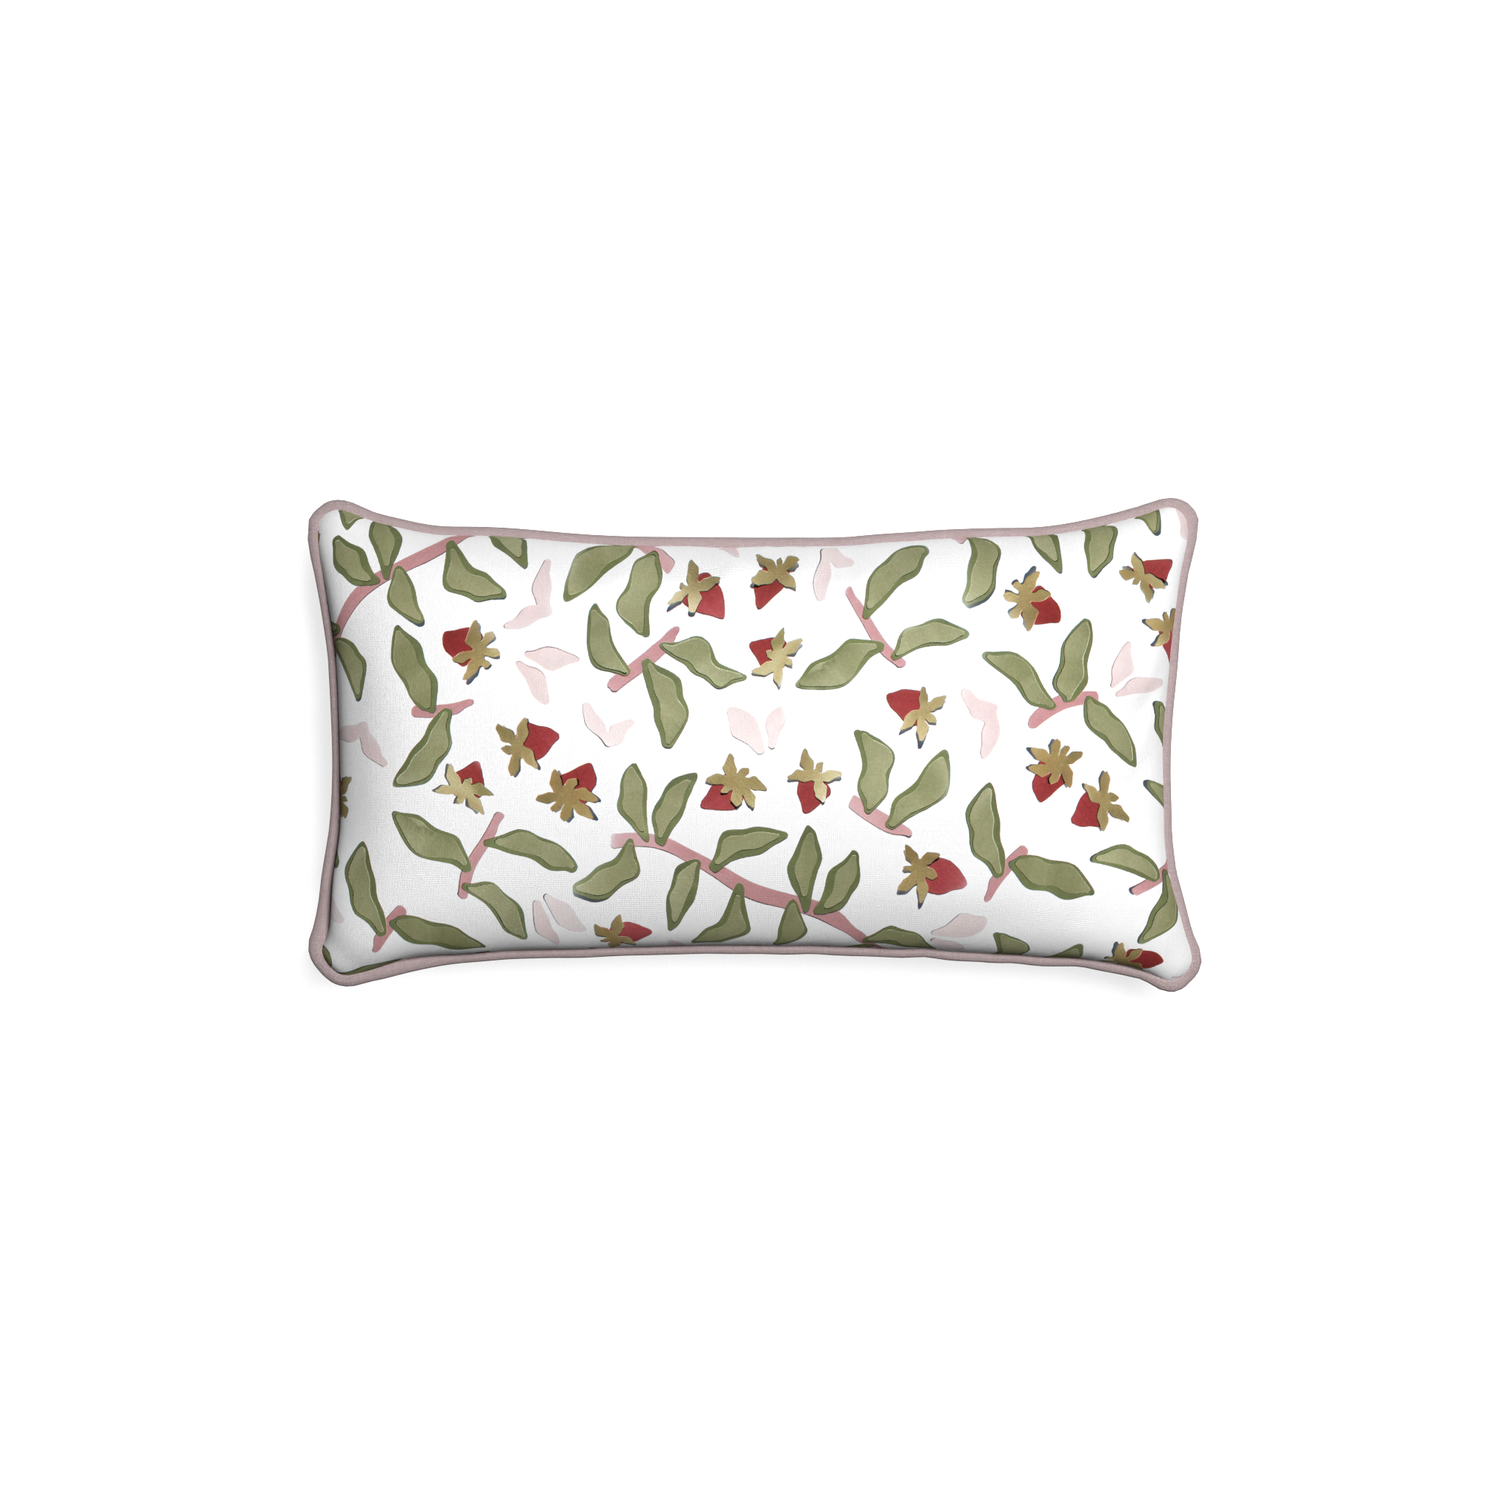 Petite-lumbar nellie custom strawberry & botanicalpillow with orchid piping on white background